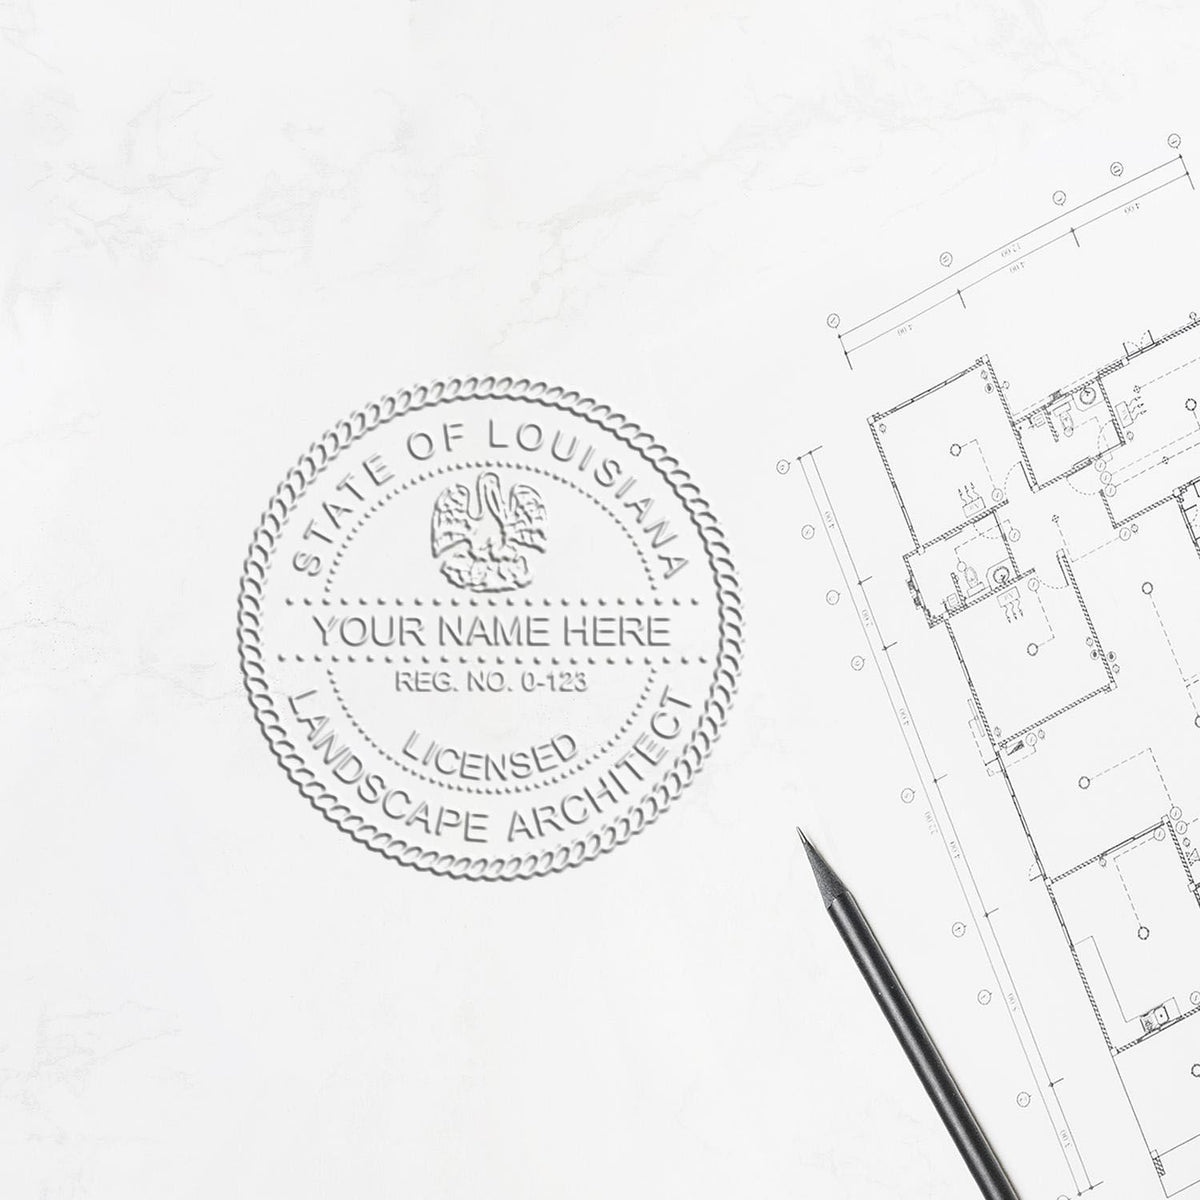 Another Example of a stamped impression of the Hybrid Louisiana Landscape Architect Seal on a office form